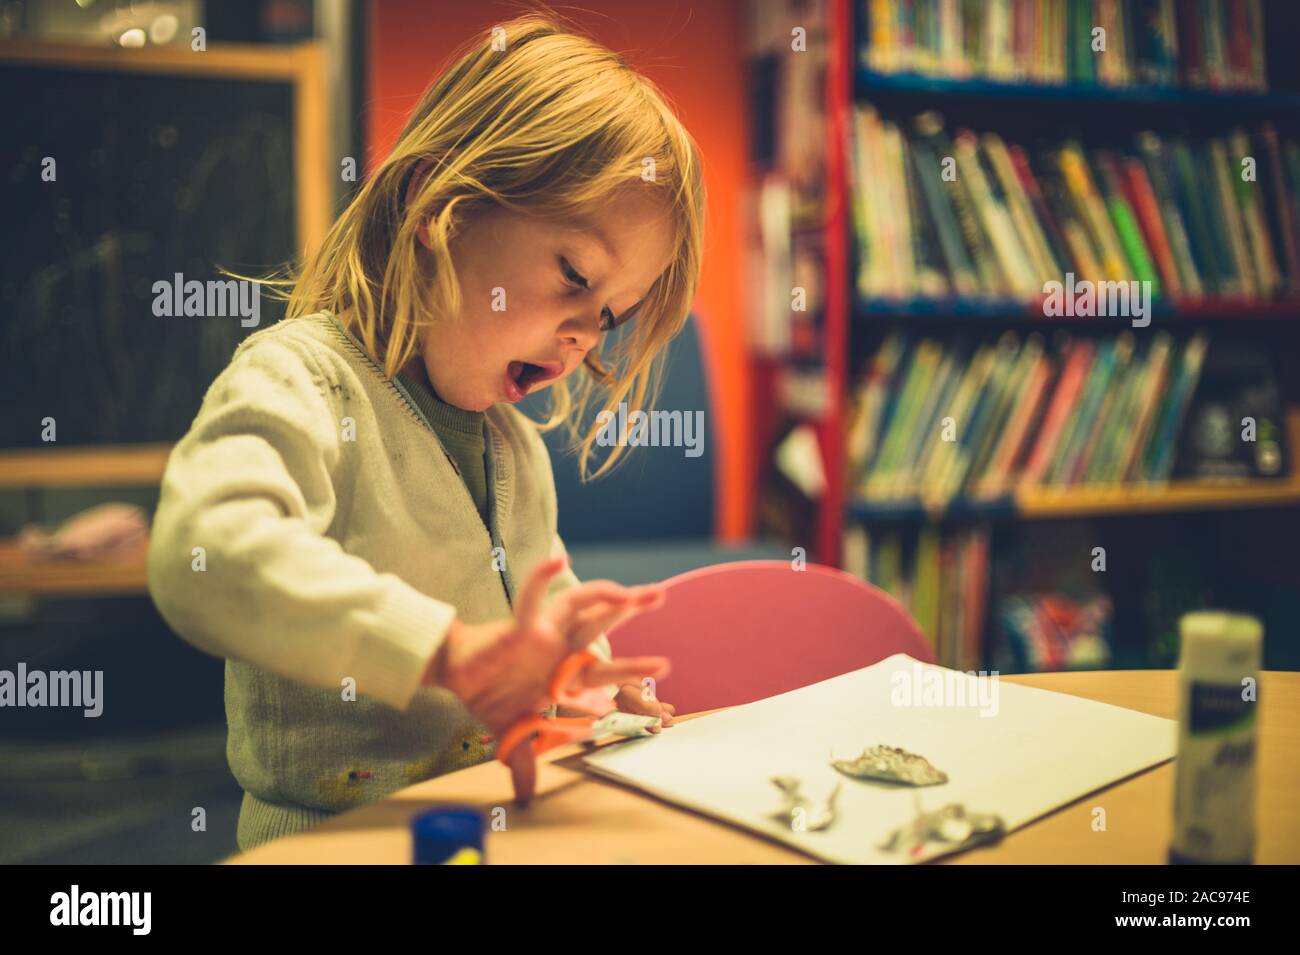 A little toddler is doing arts and crafts with scissors and glue at school Stock Photo